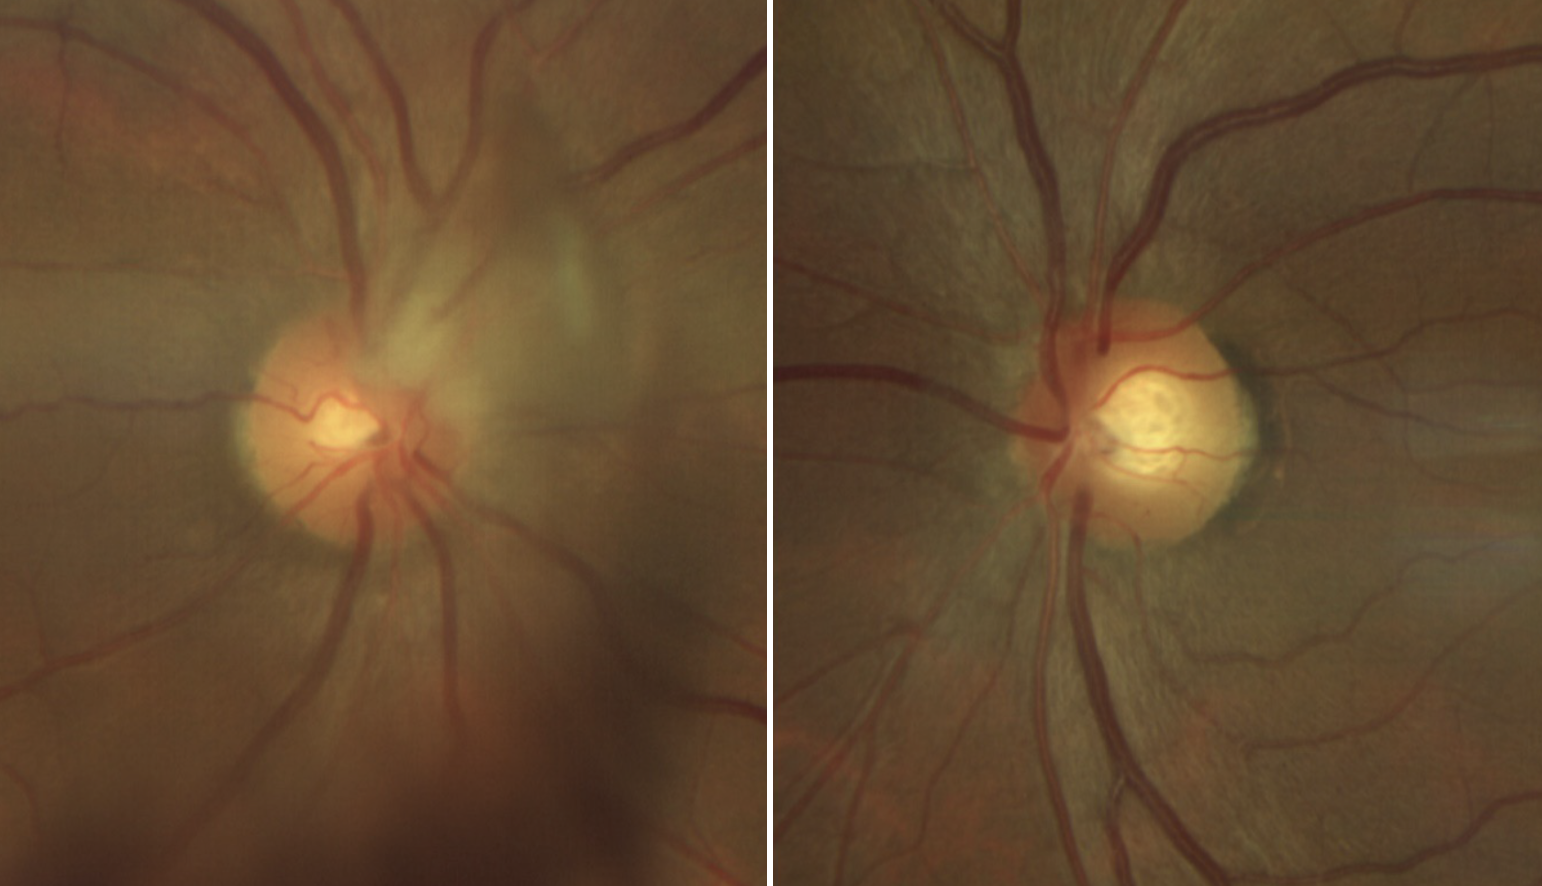 Fig. 1. Right and left optic nerves. The right optic nerve (left image) is seen with blurred and elevated disc margin superonasally. There is also vitreous hemorrhage causing shadowing inferiorly.